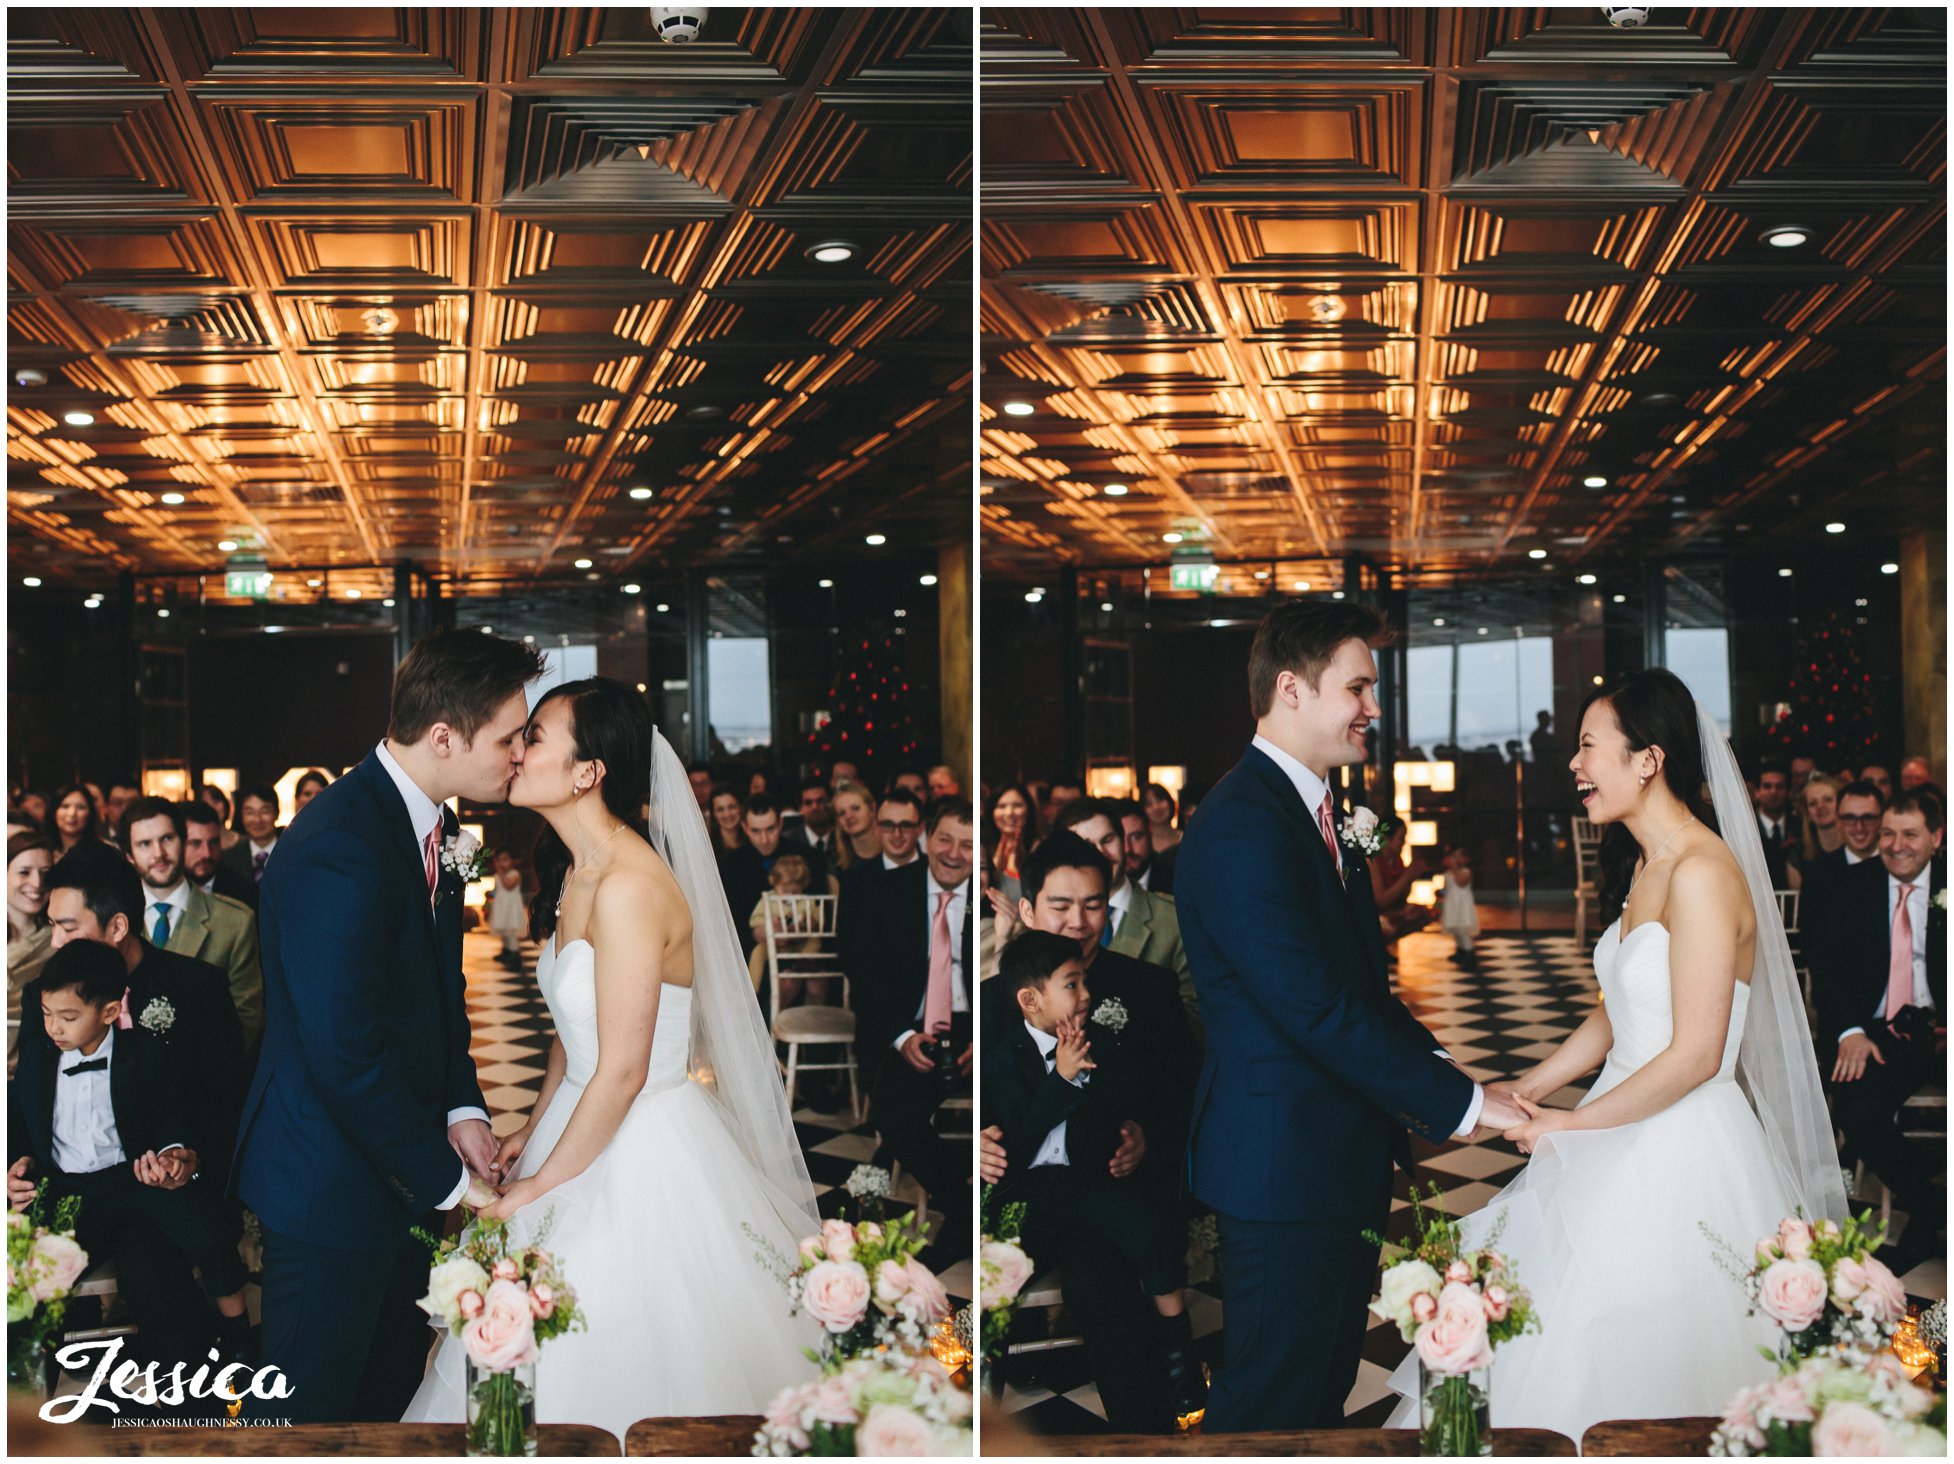 newly wed's share their first kiss during their wedding ceremony at on the 7th - media city, manchester